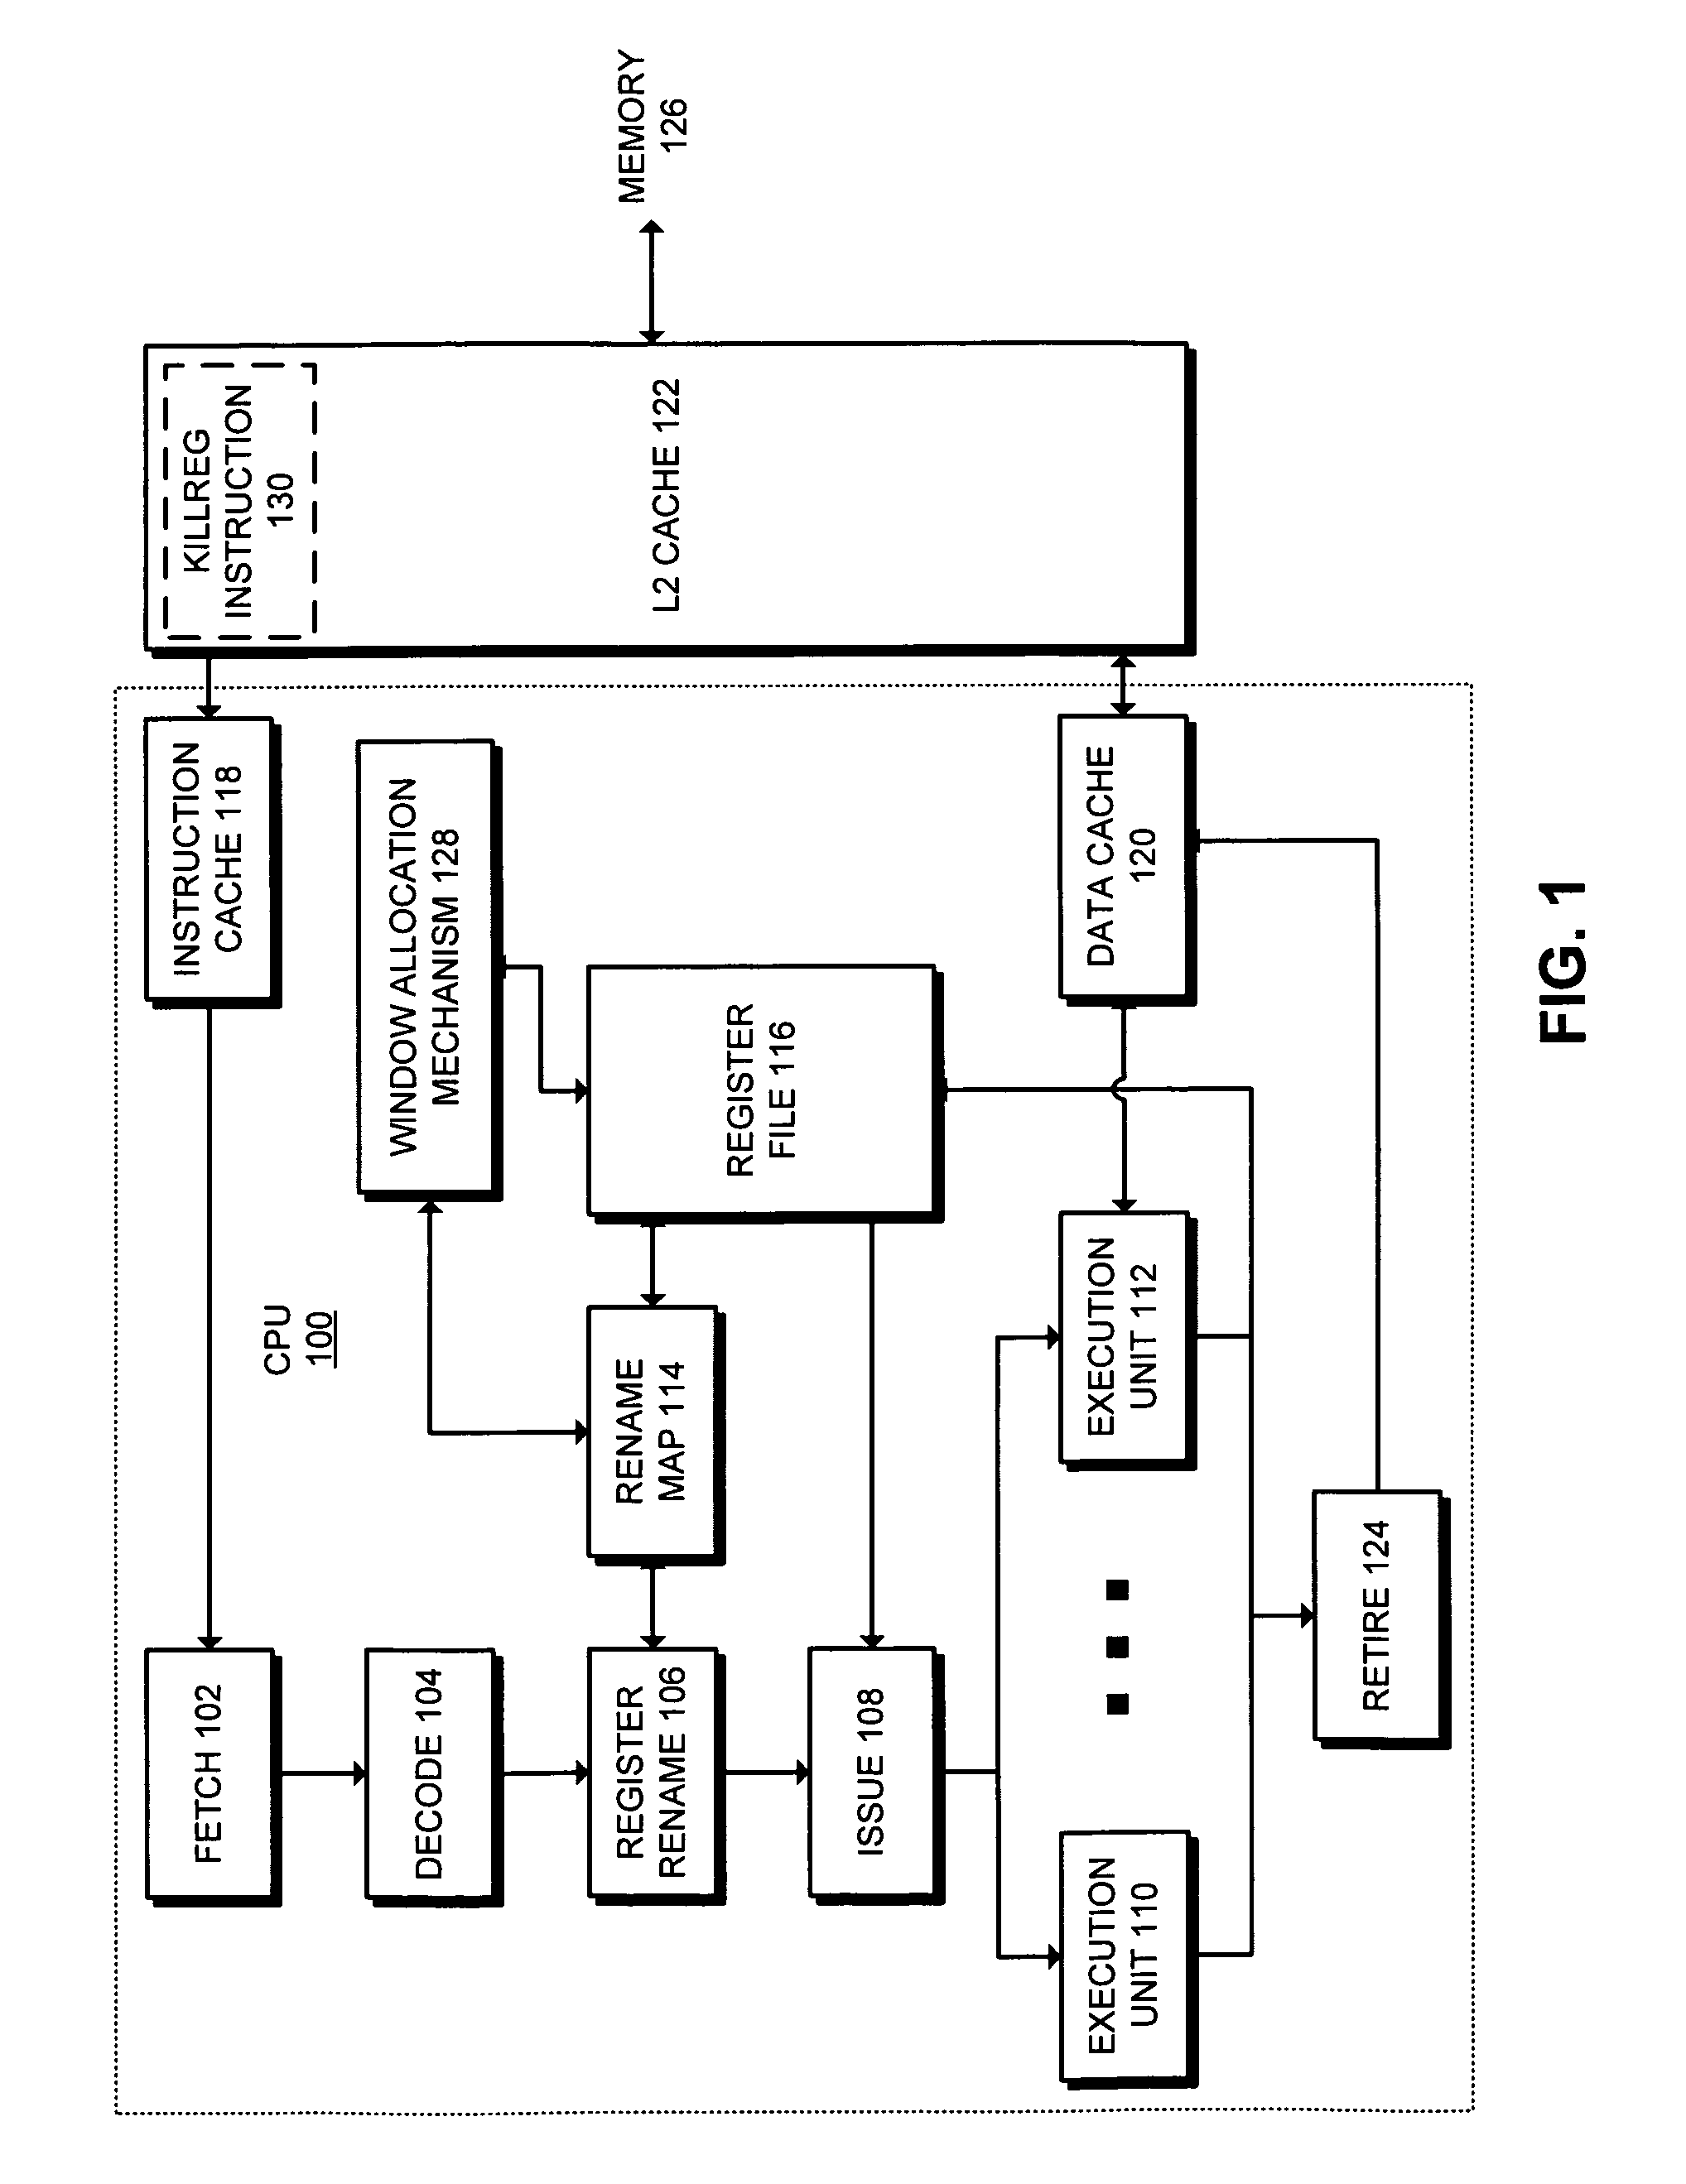 Method and apparatus for dynamically allocating registers in a windowed architecture